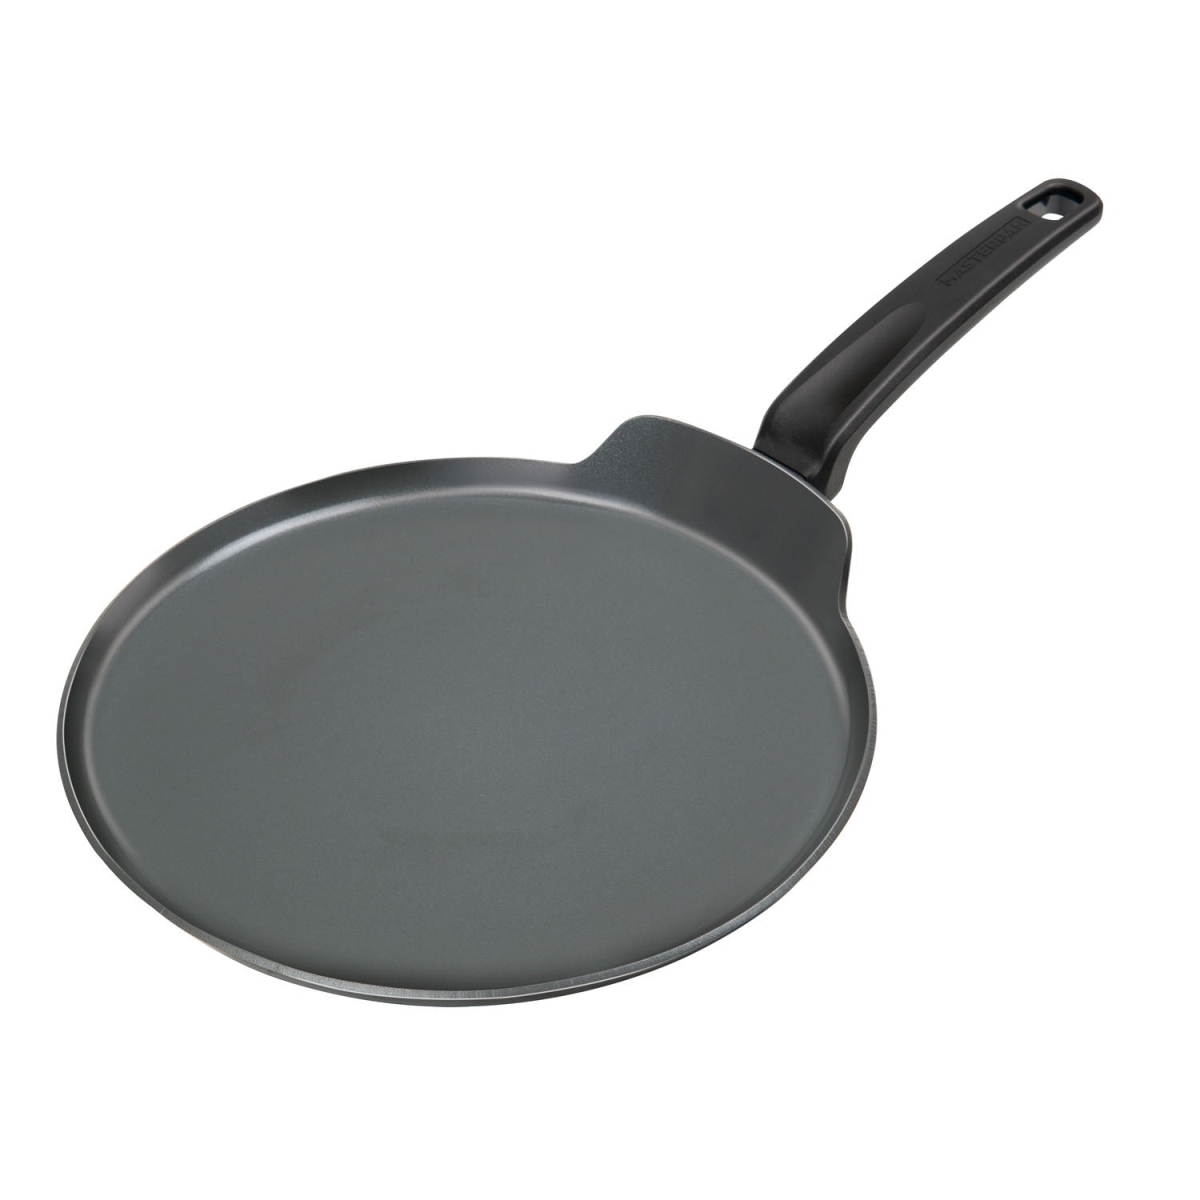 Picture of Masterpan MP-180 11 in. Crepe Pan & Healthy Ceramic Non-Stick Aluminium Cookware with Bakelite Handle